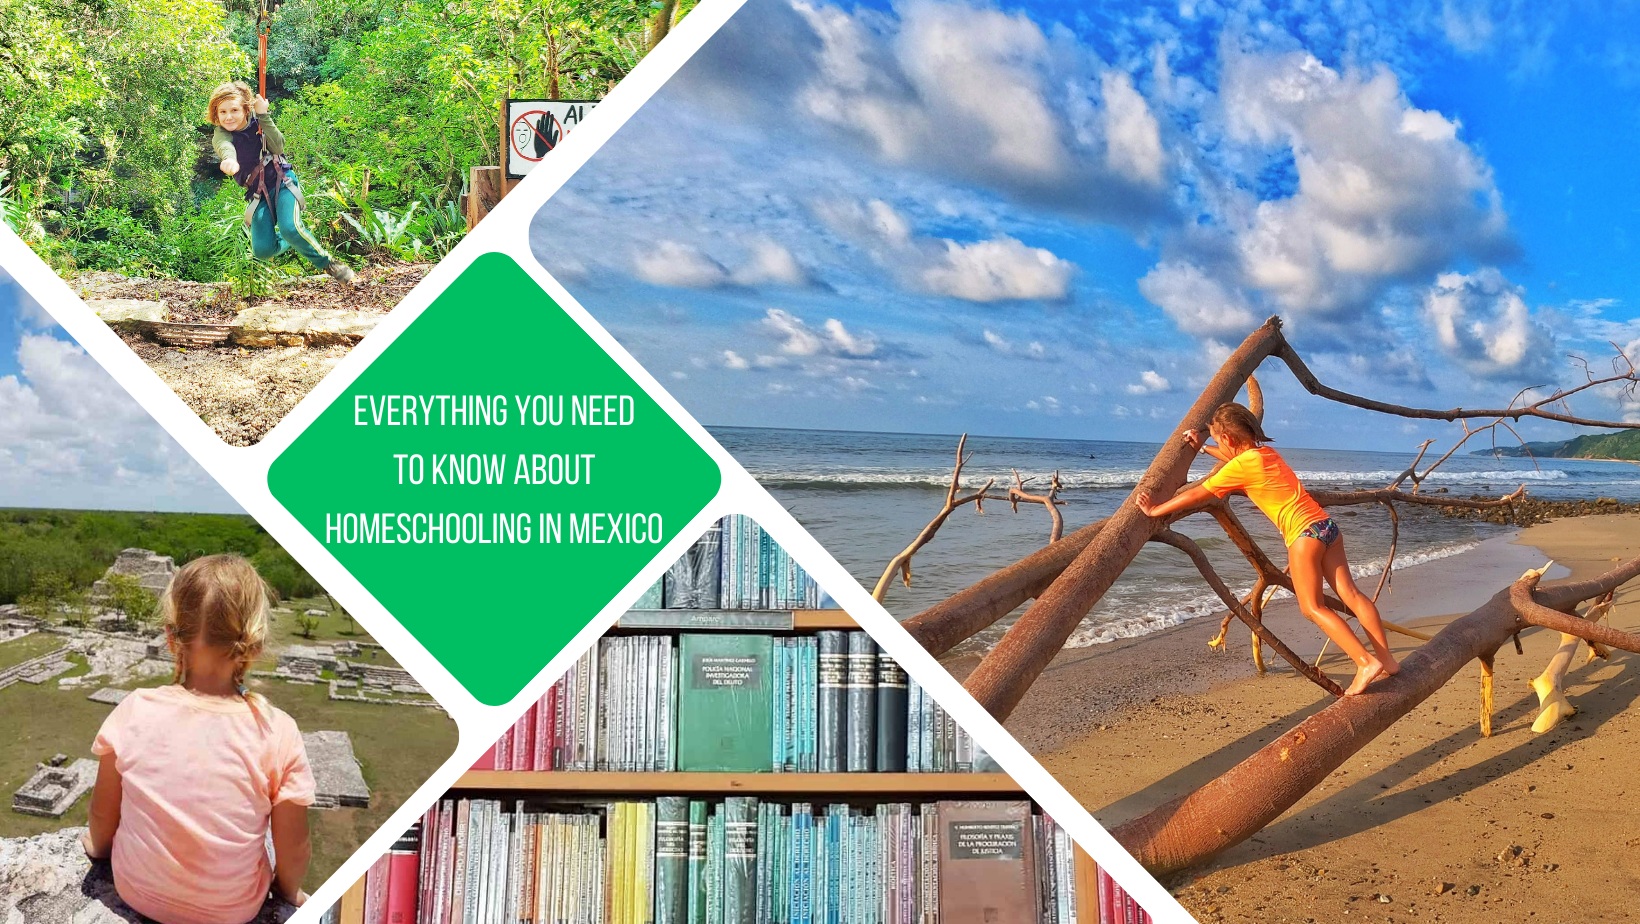 green square with words "everything you need to know about homeschooling in mexico", around it are 4 pictures - on left a kid sitting on top of a ruin looking out over others, on top a kid ziplining, to right a kid on a dead tree on a beach and the bottom is a colourful bookcase full of books